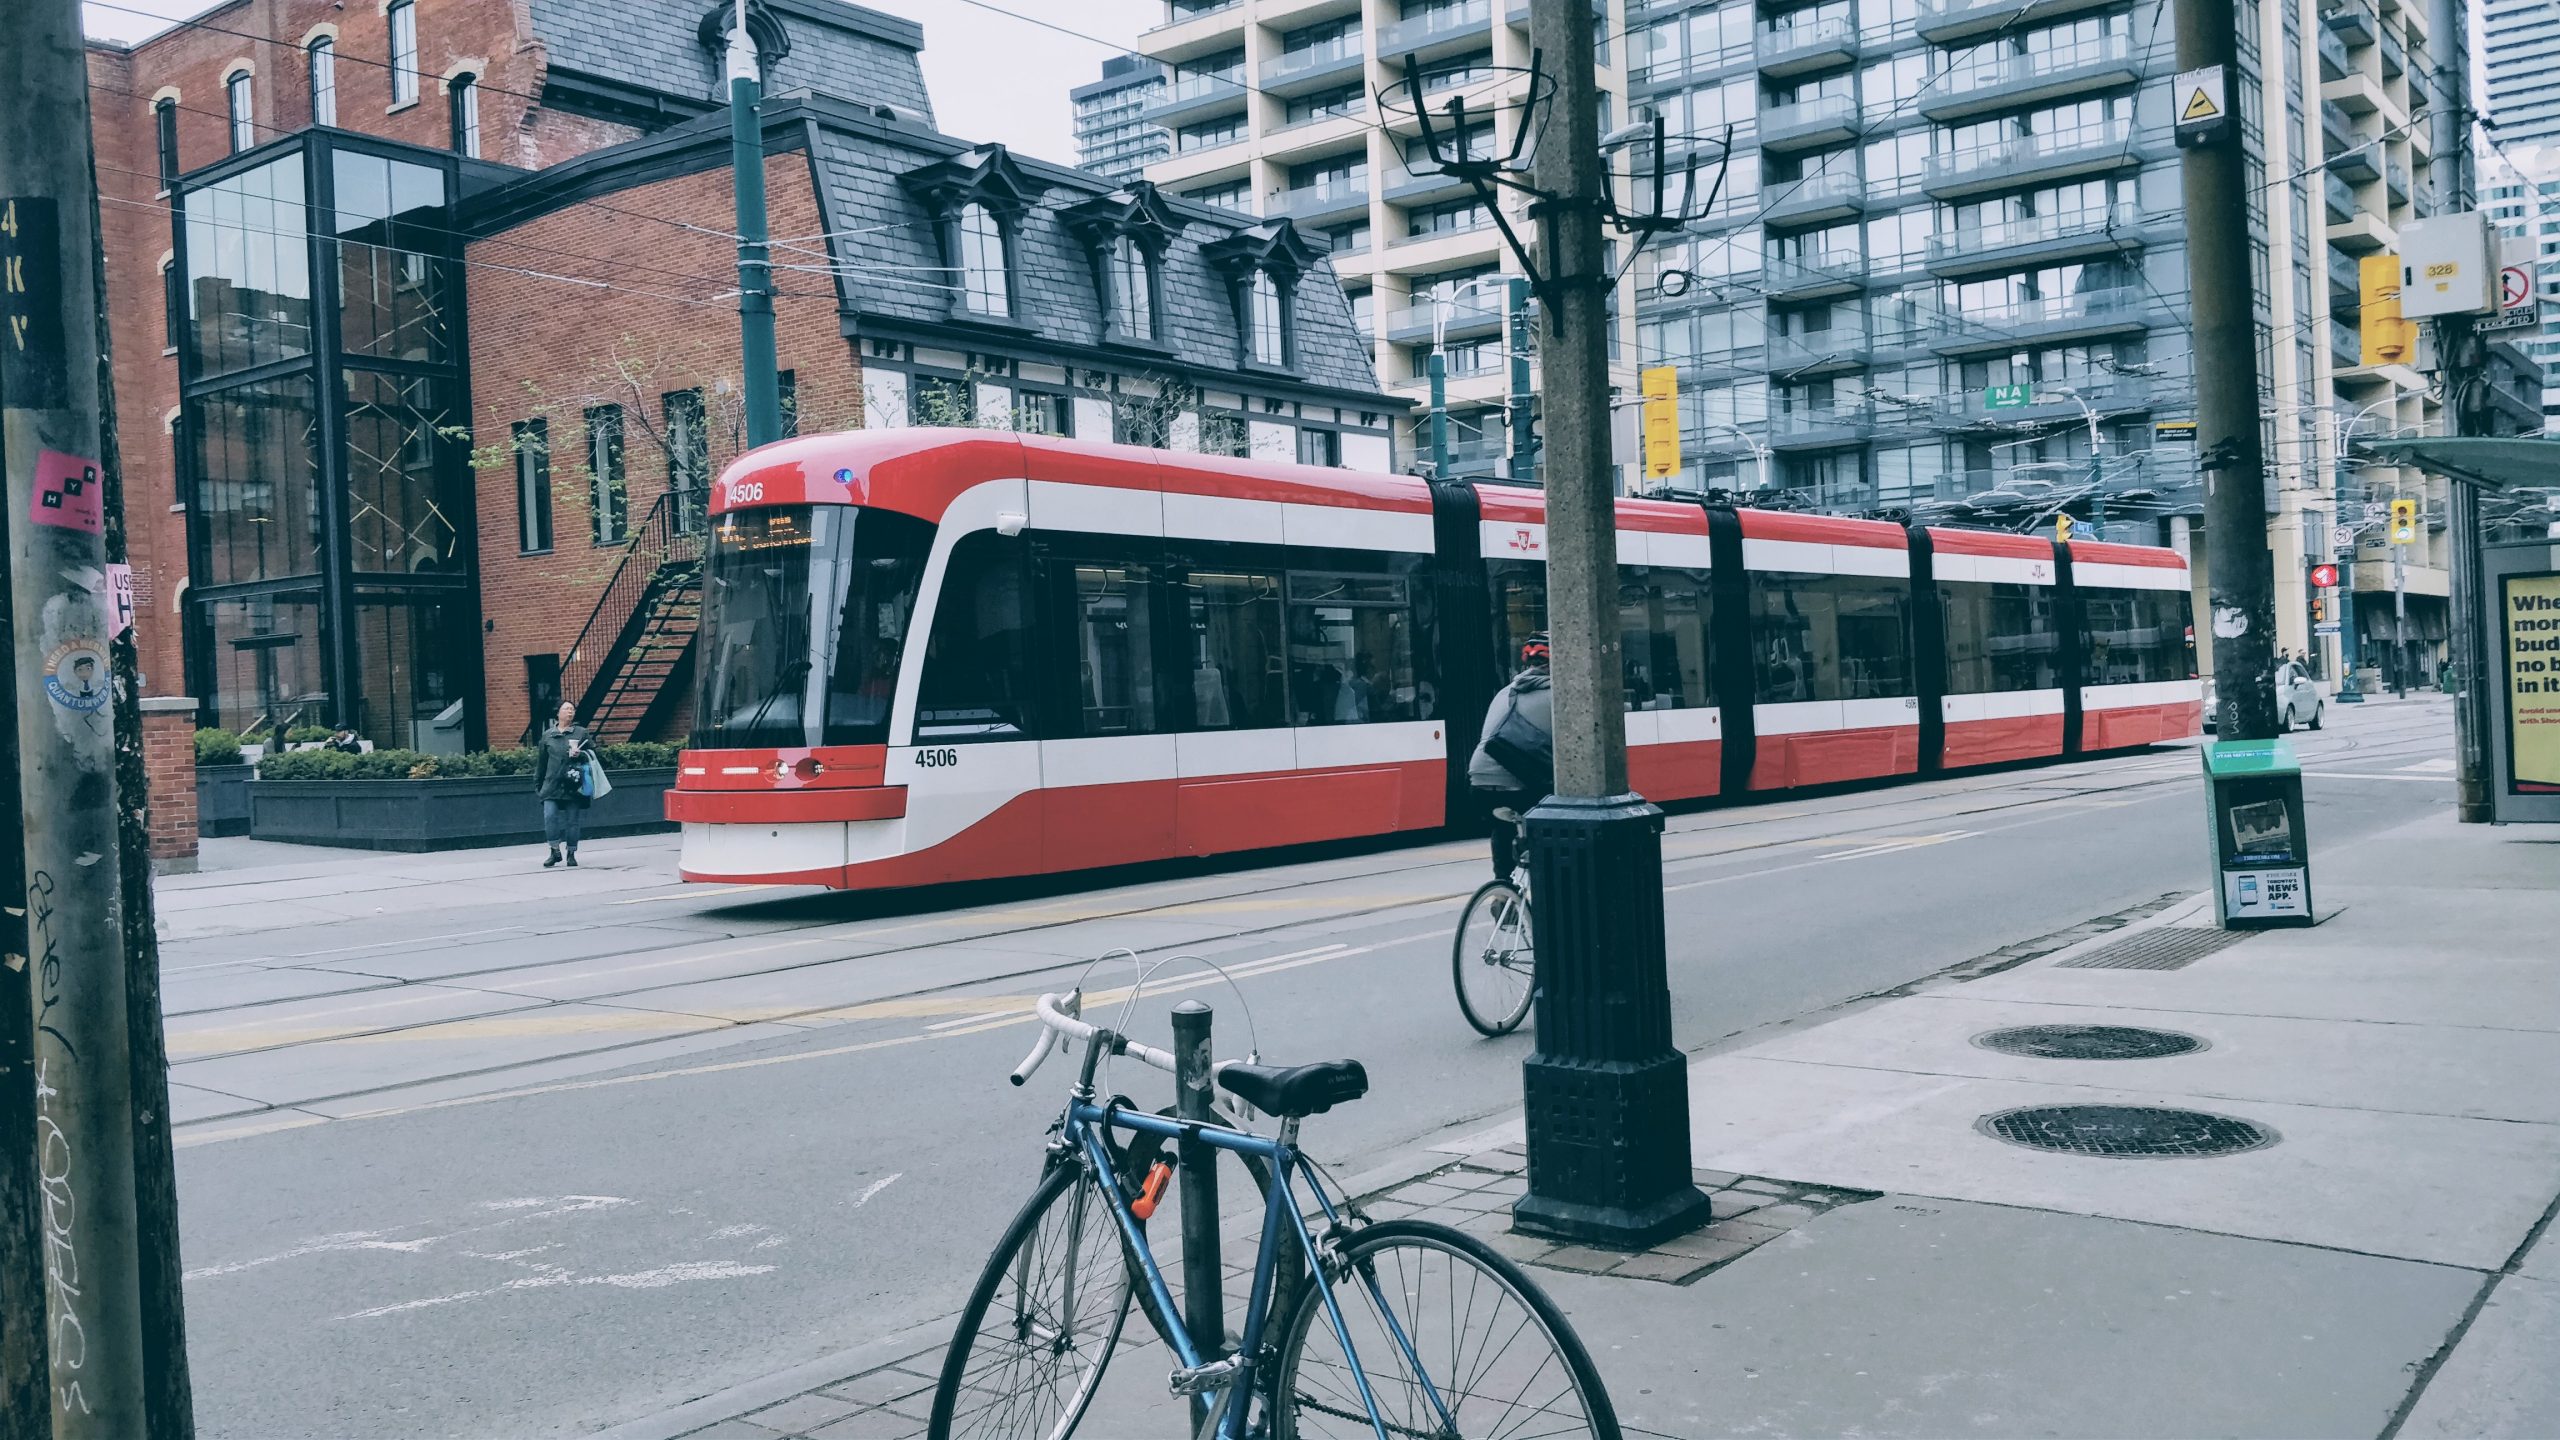 Provincial Liberals Promise “Buck-A-Ride” for All Transit if Elected